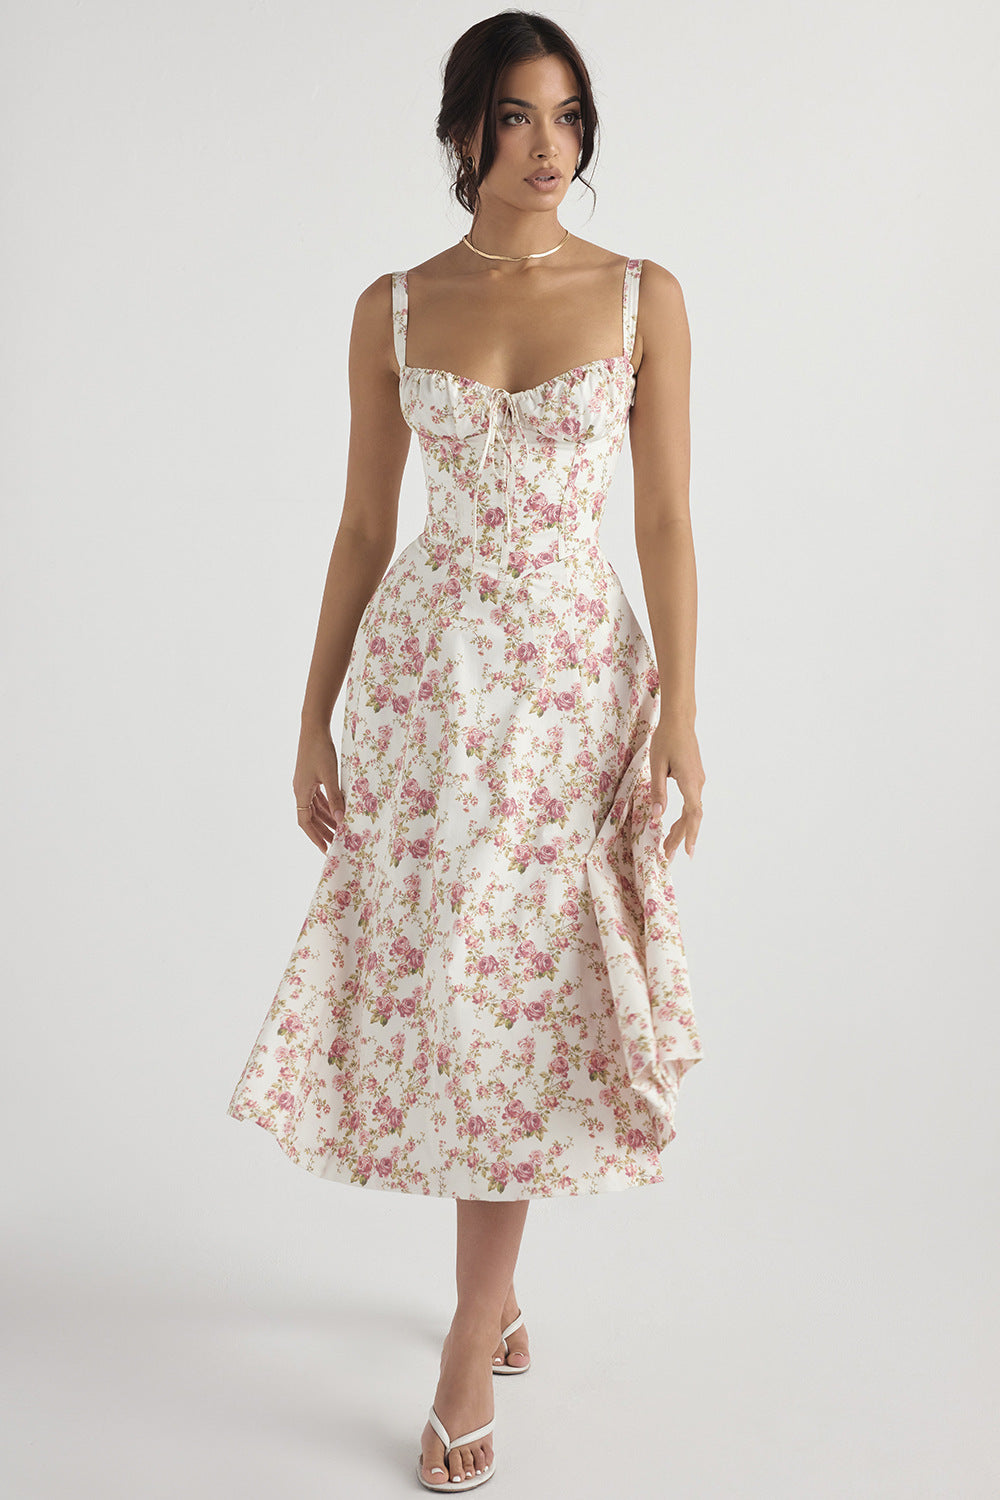 New Women's Floral Print Dress With Straps